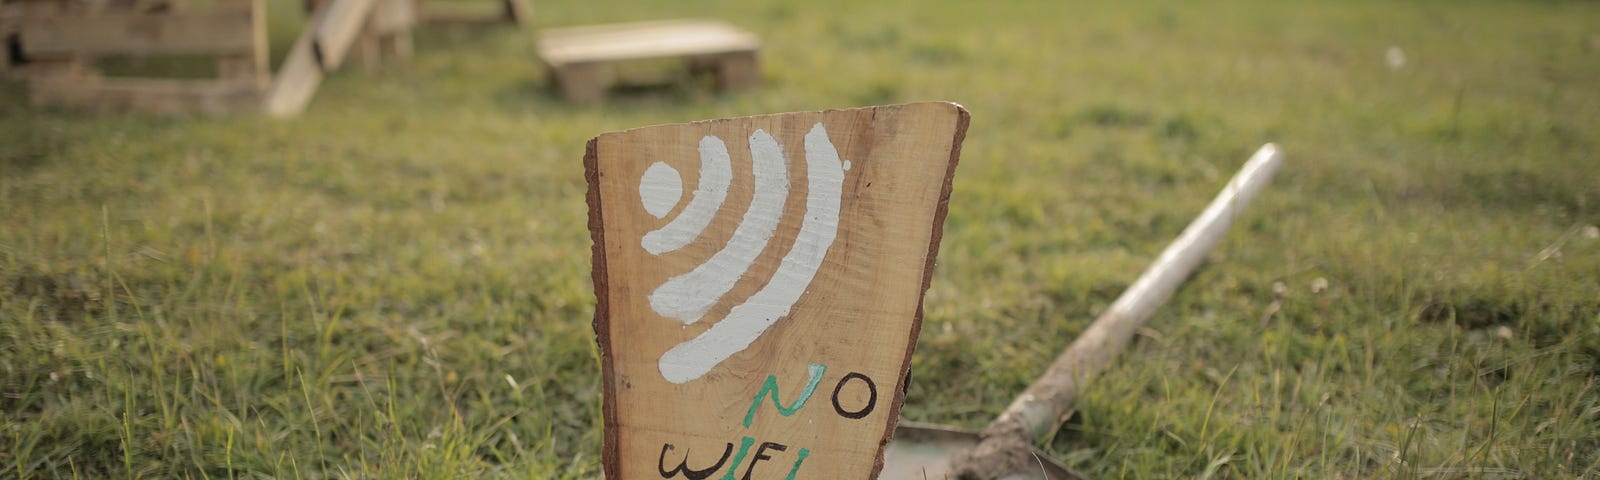 A sign in a yard that says “No WIFI Zone” — Unsplash